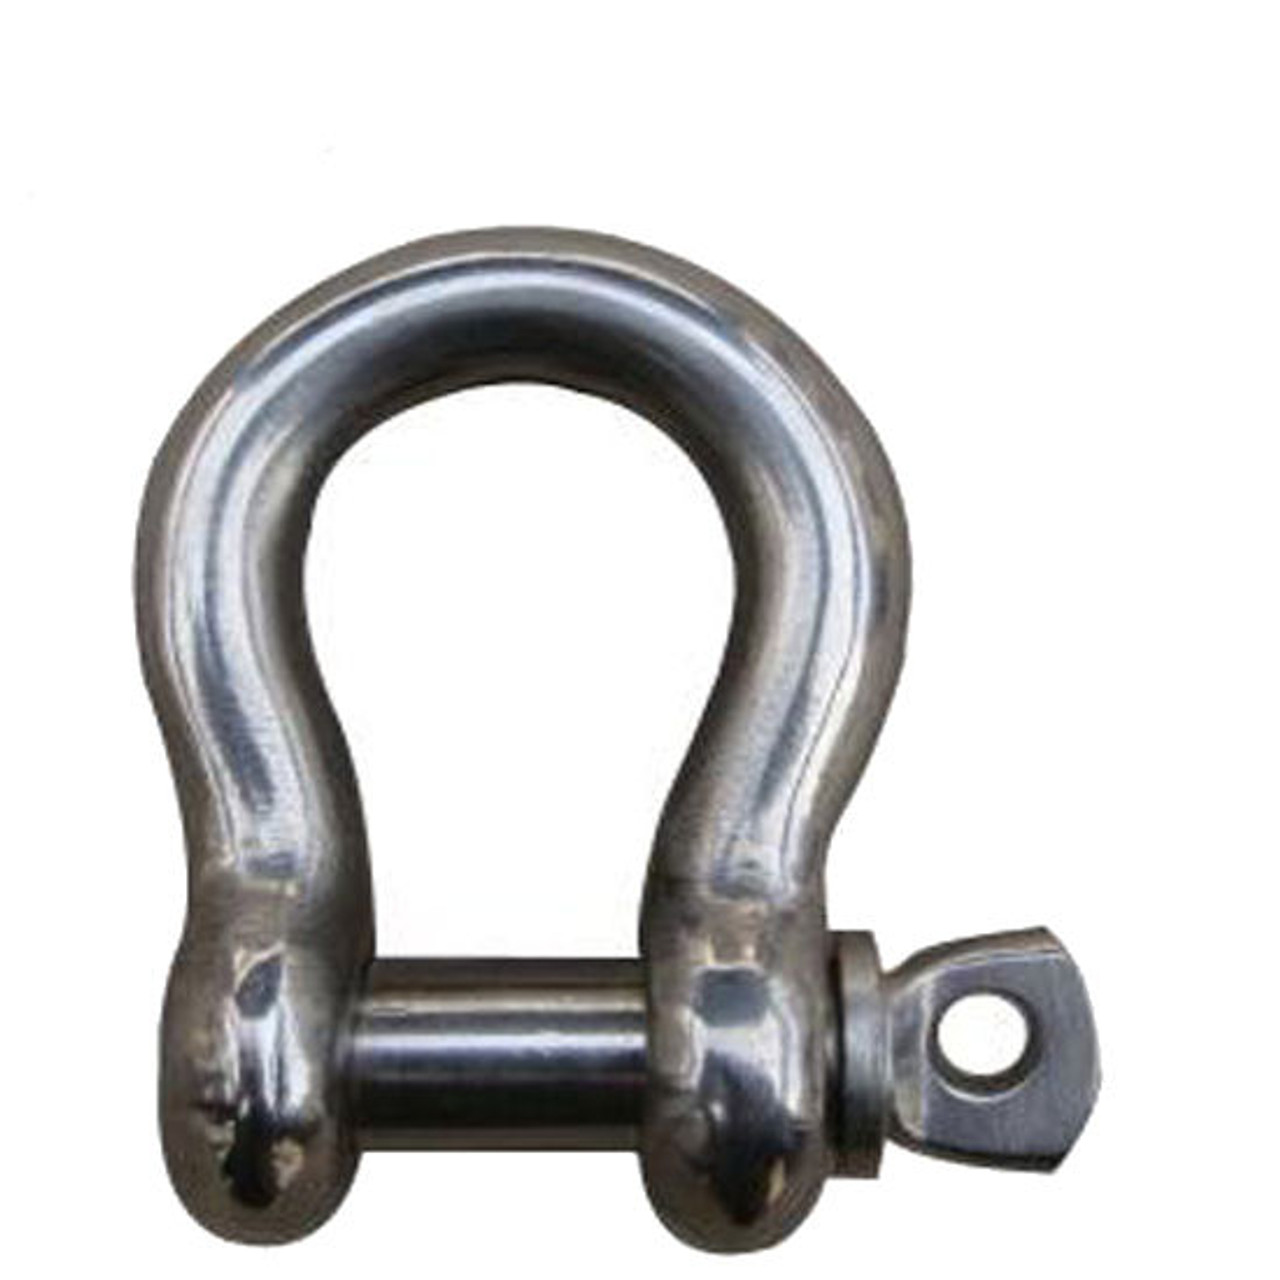 Stainless Steel Bow Anchor Shackle with Screw Pin Marine/Boat/Sailing/Rigging 